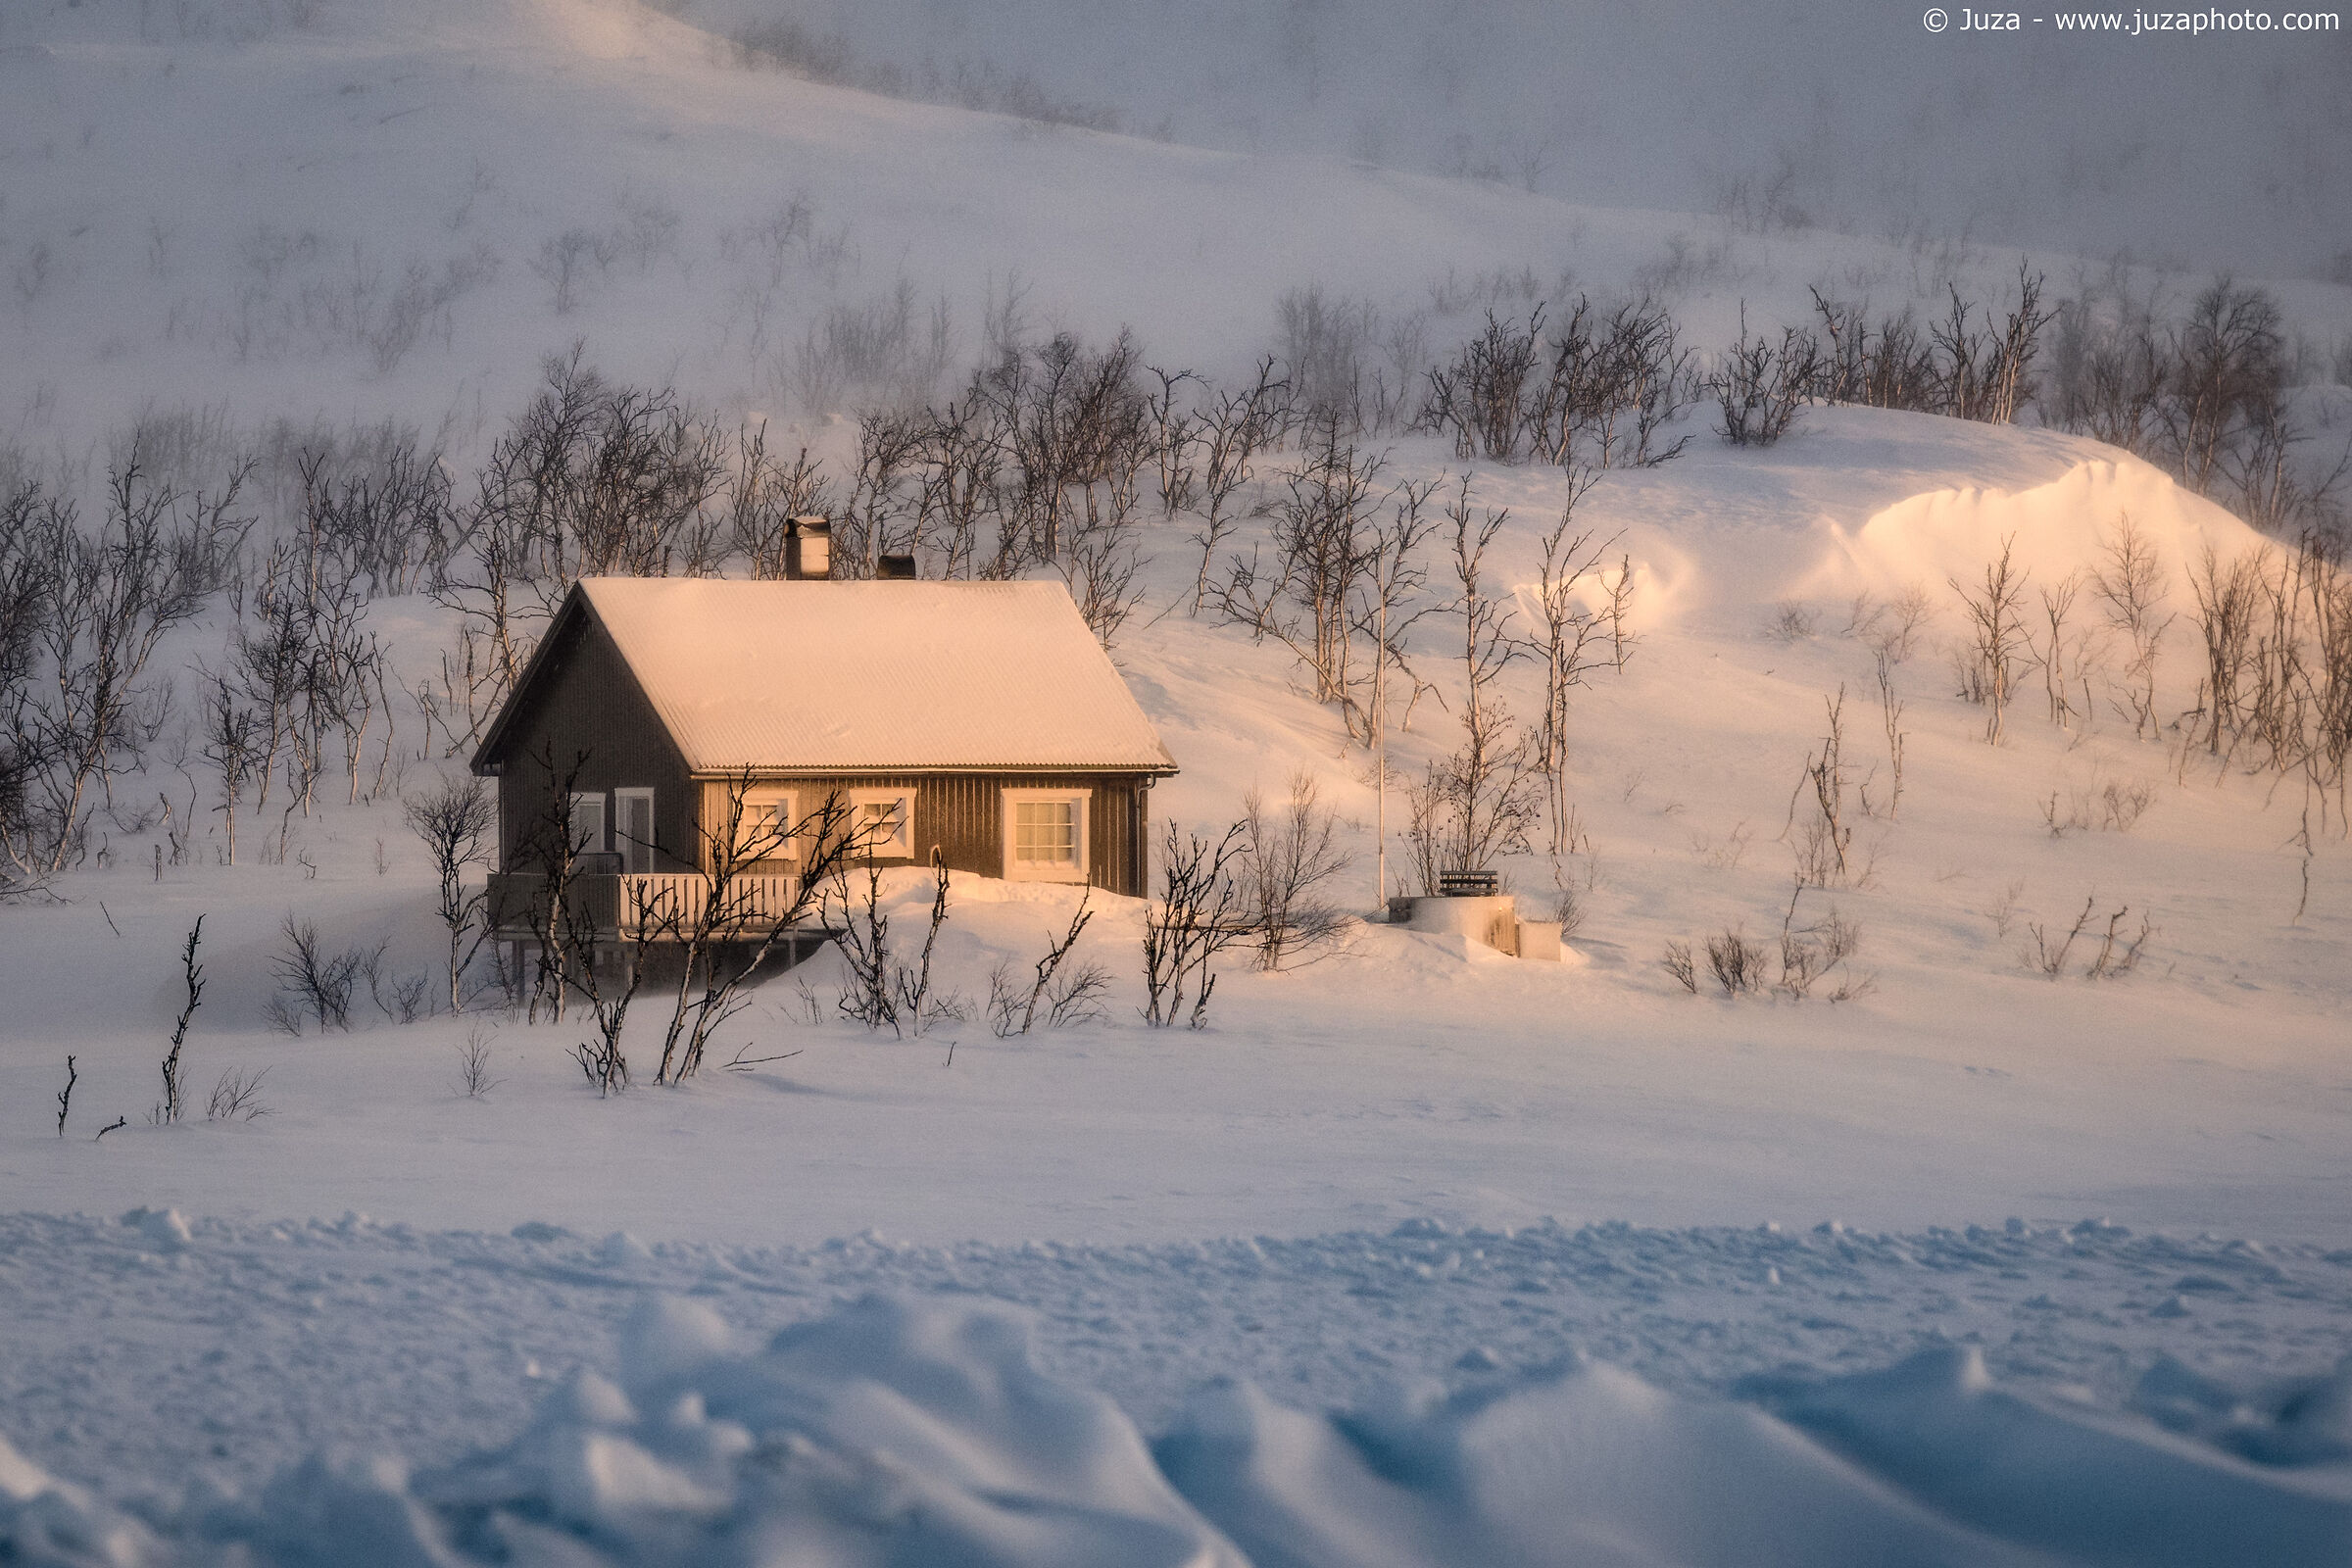 The house in the snow...